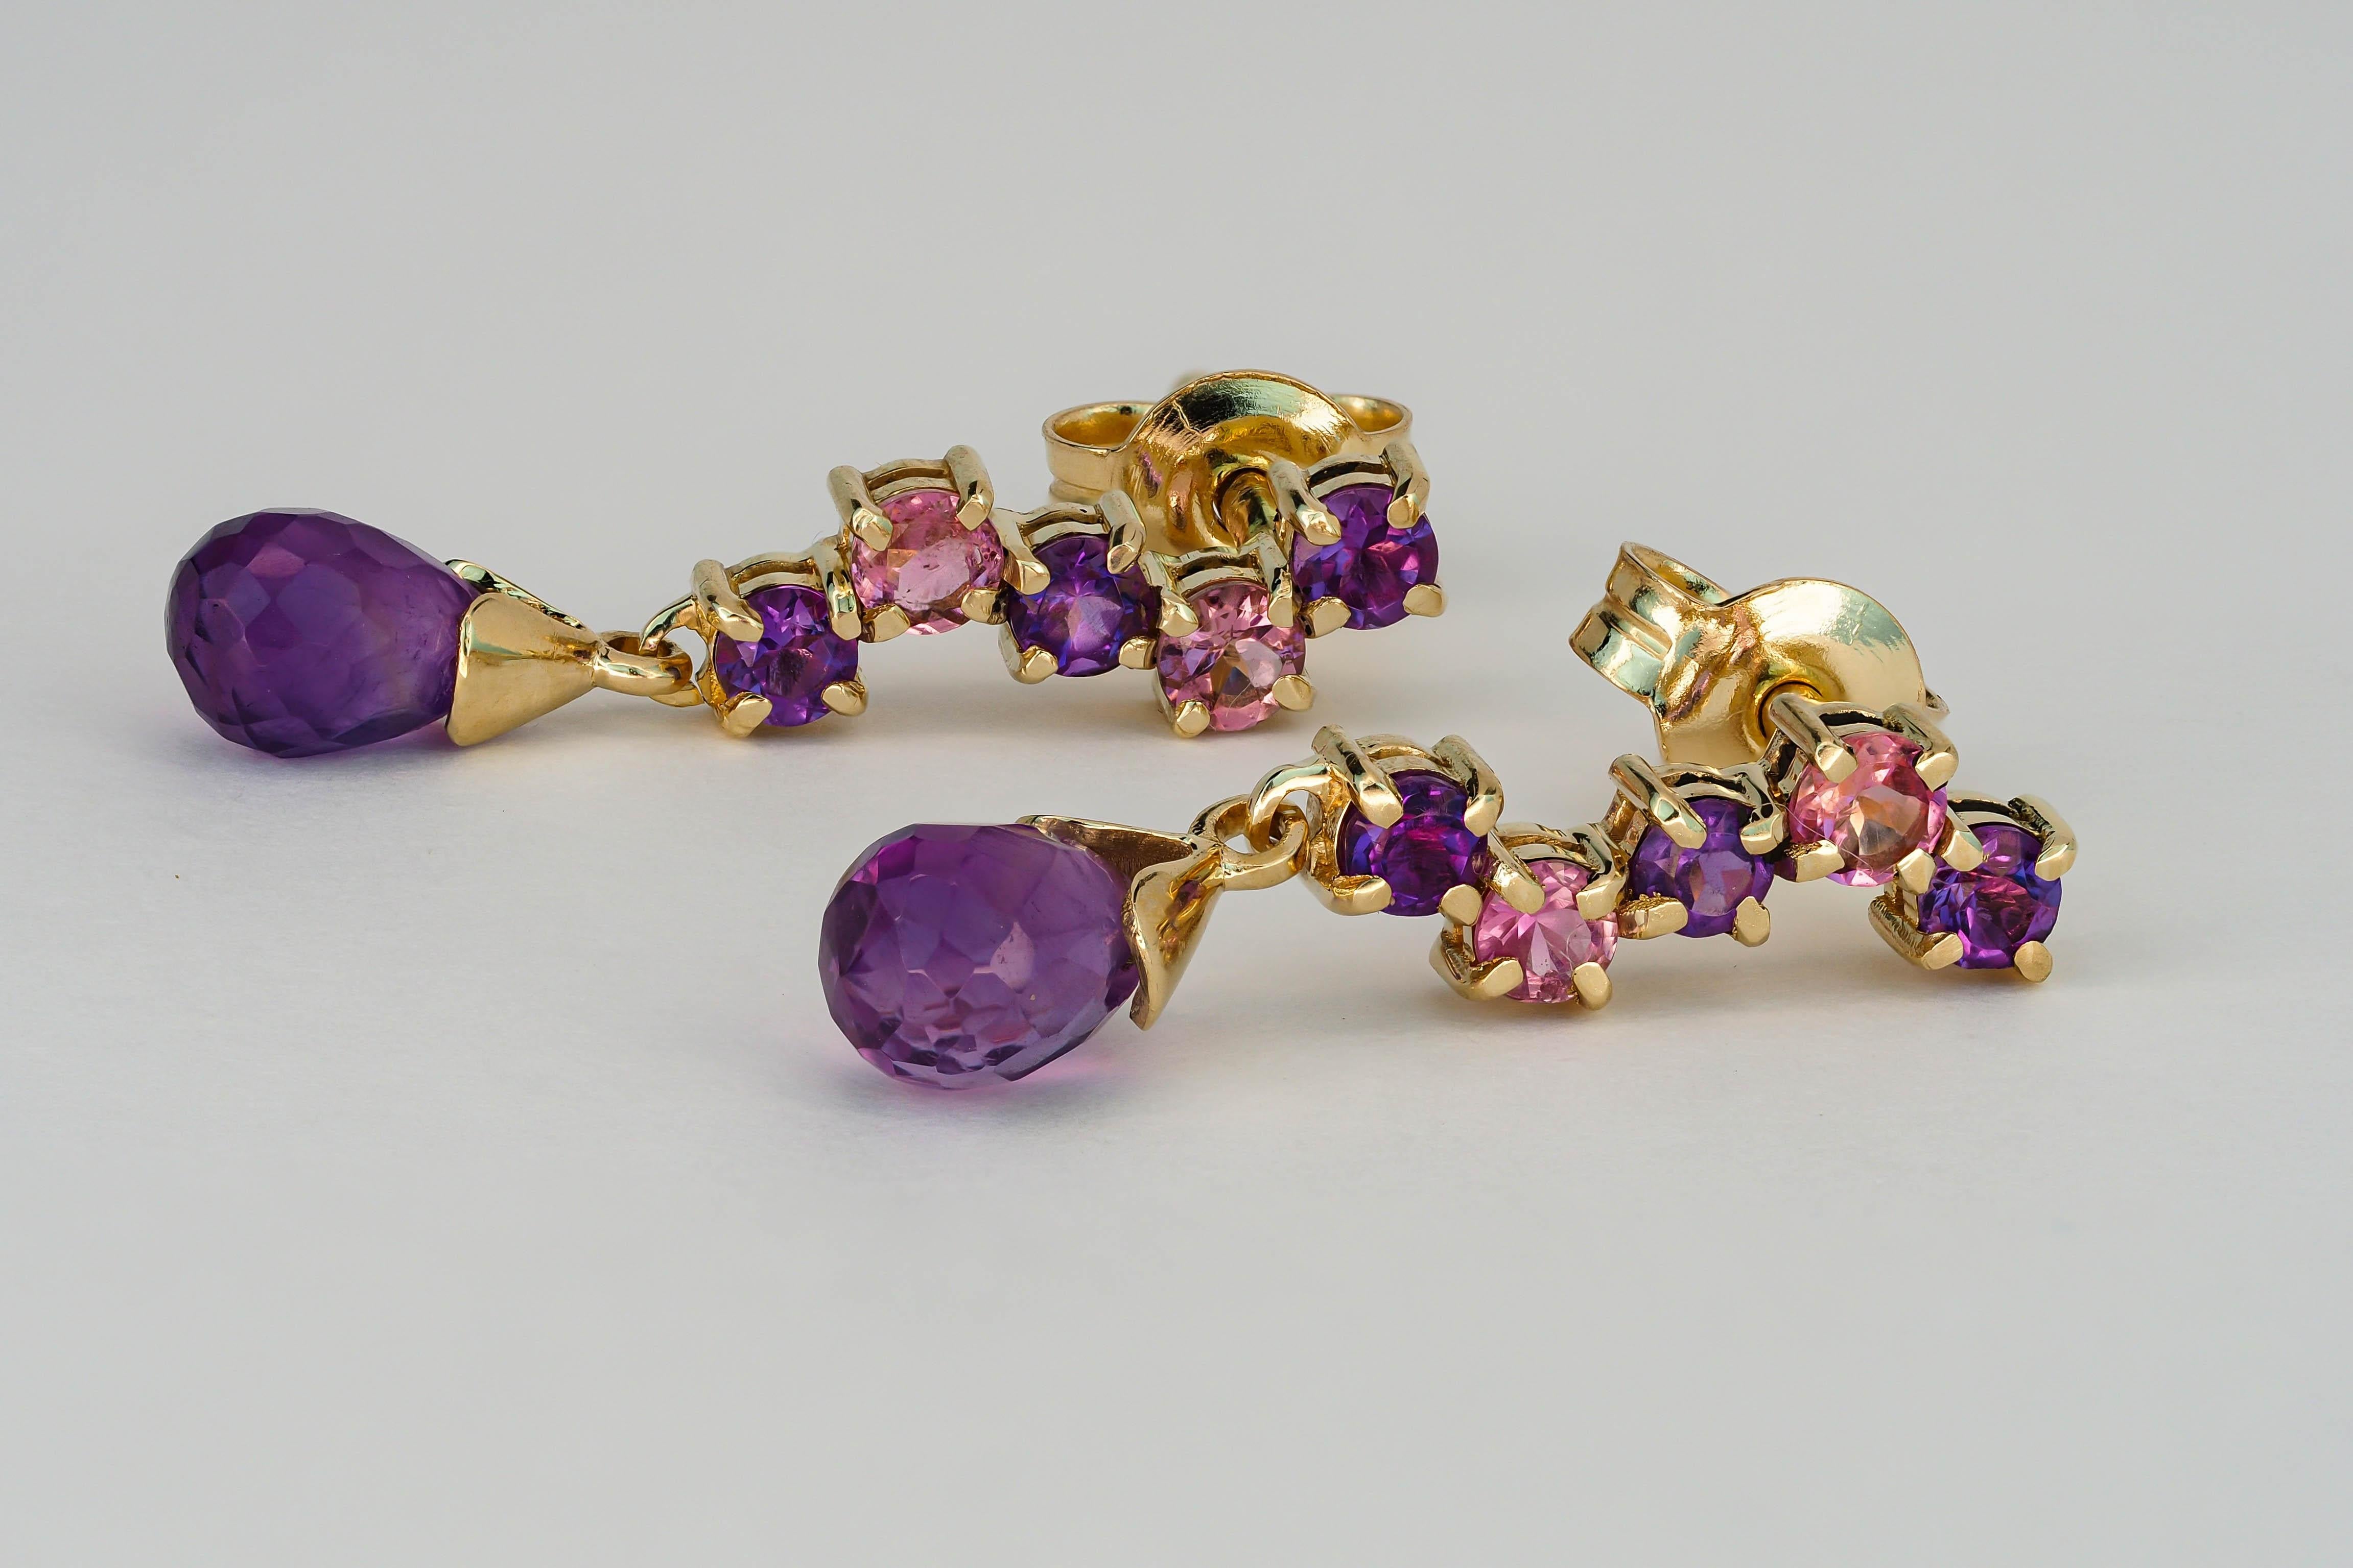 14k gold earrings with amethysts and sapphires.

Total weight: 2.20 g.
Size: 22 x 5 mm.
Central stones:
Amethysts - 2 pieces
Cut: Briolettes
Weight: approx 2.00 ct. total.
Color: violet
Clarity: Transparent with inclusions

Side stones:
Amethysts: 6